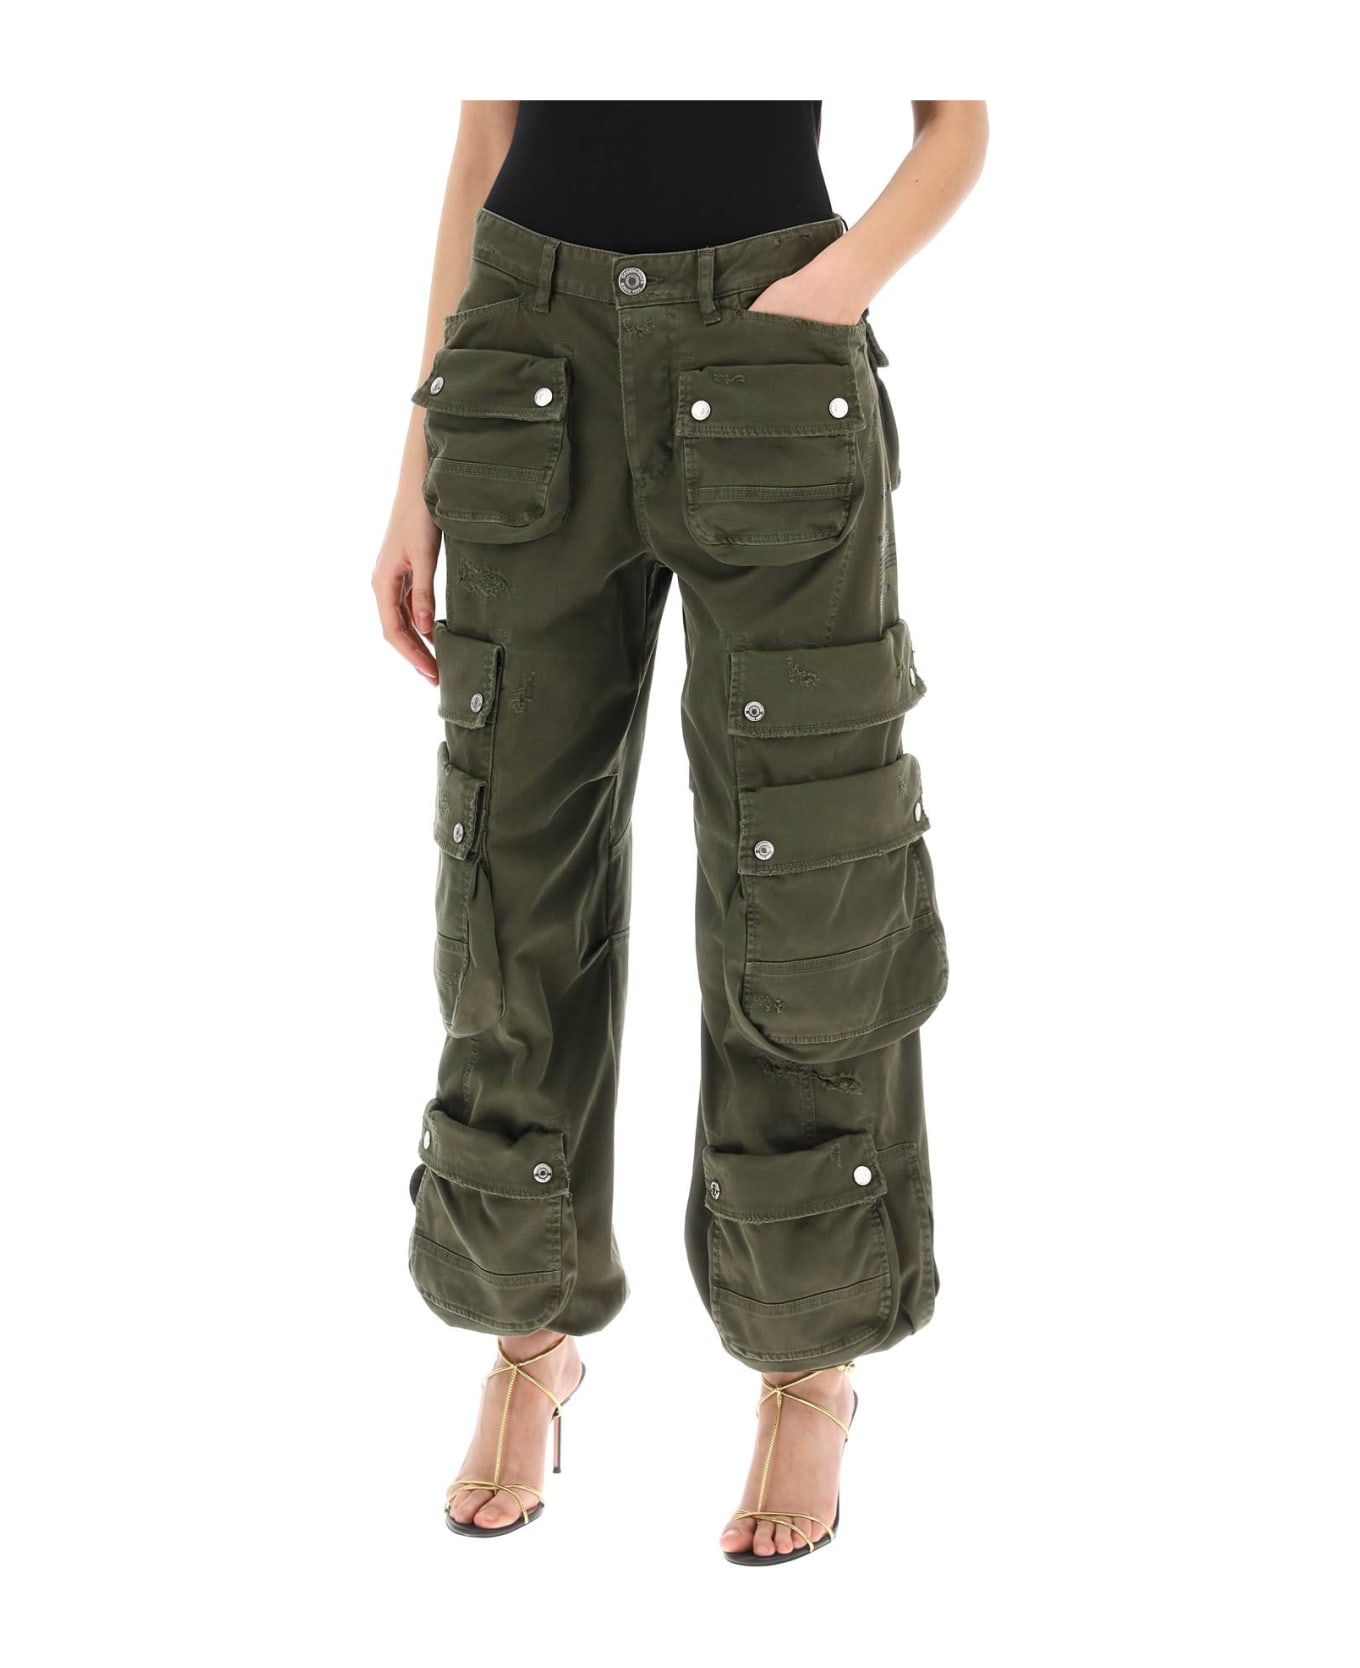 Dsquared2 Pocket Detailed Cargo Pants - MILITARY GREEN (Green)